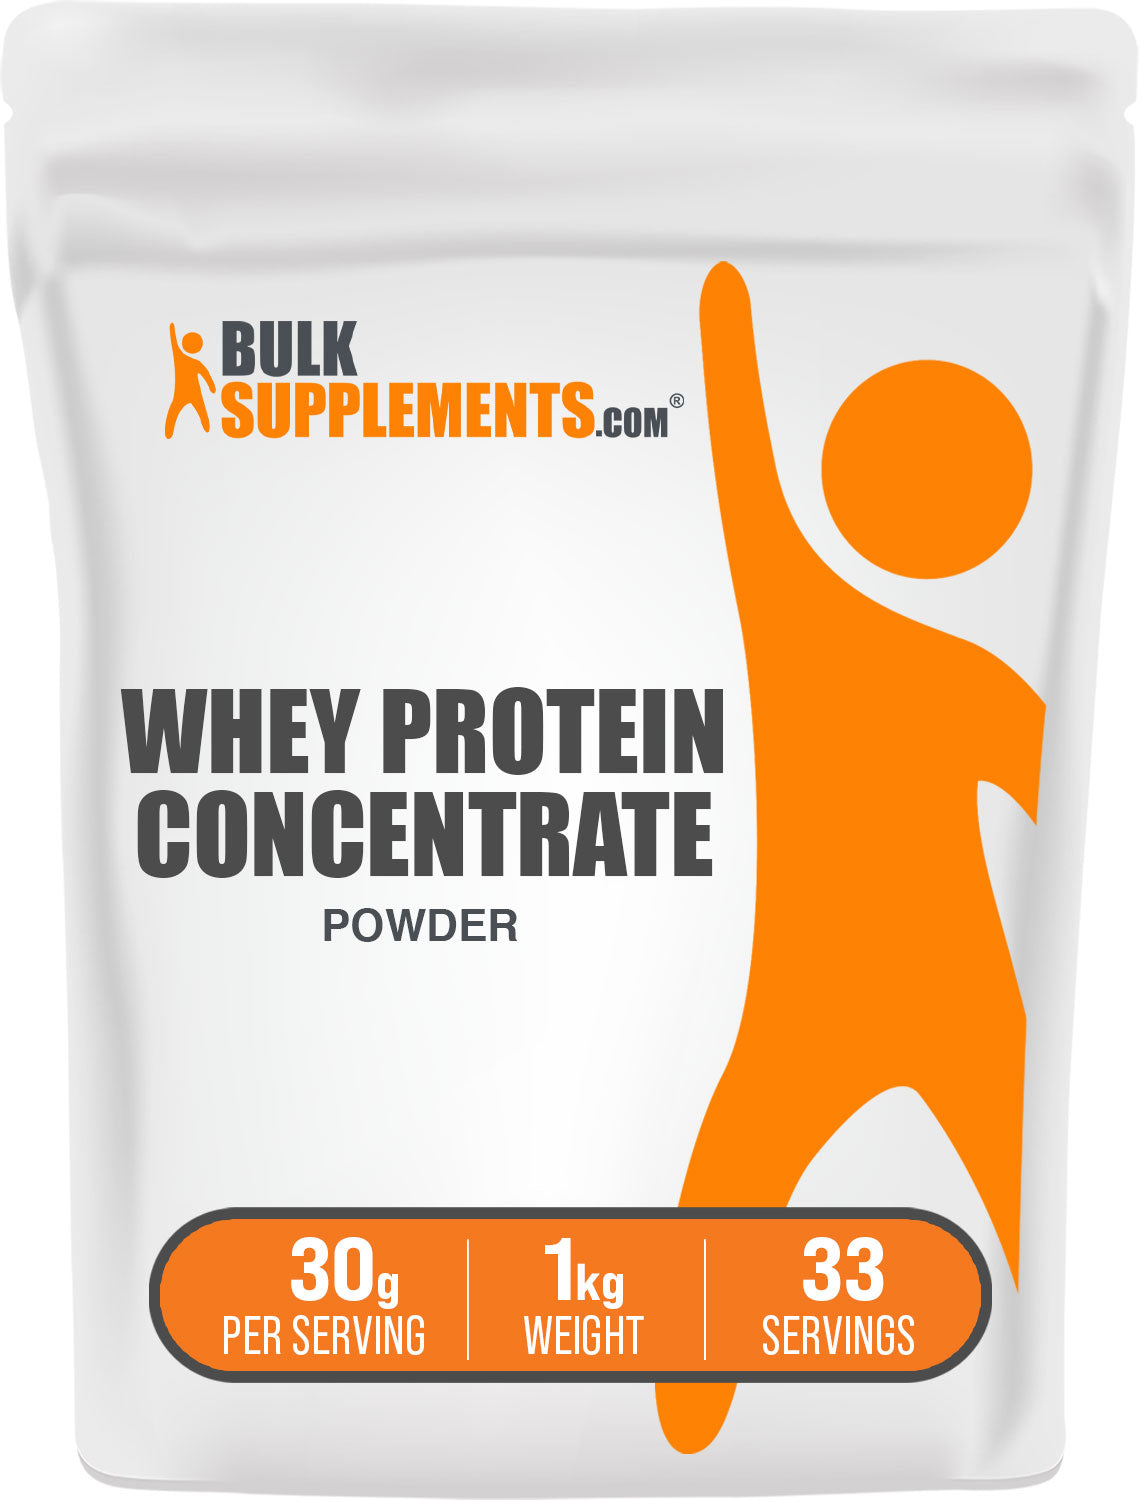 BulkSupplements Whey Protein Concentrate 80% Powder 1kg bag